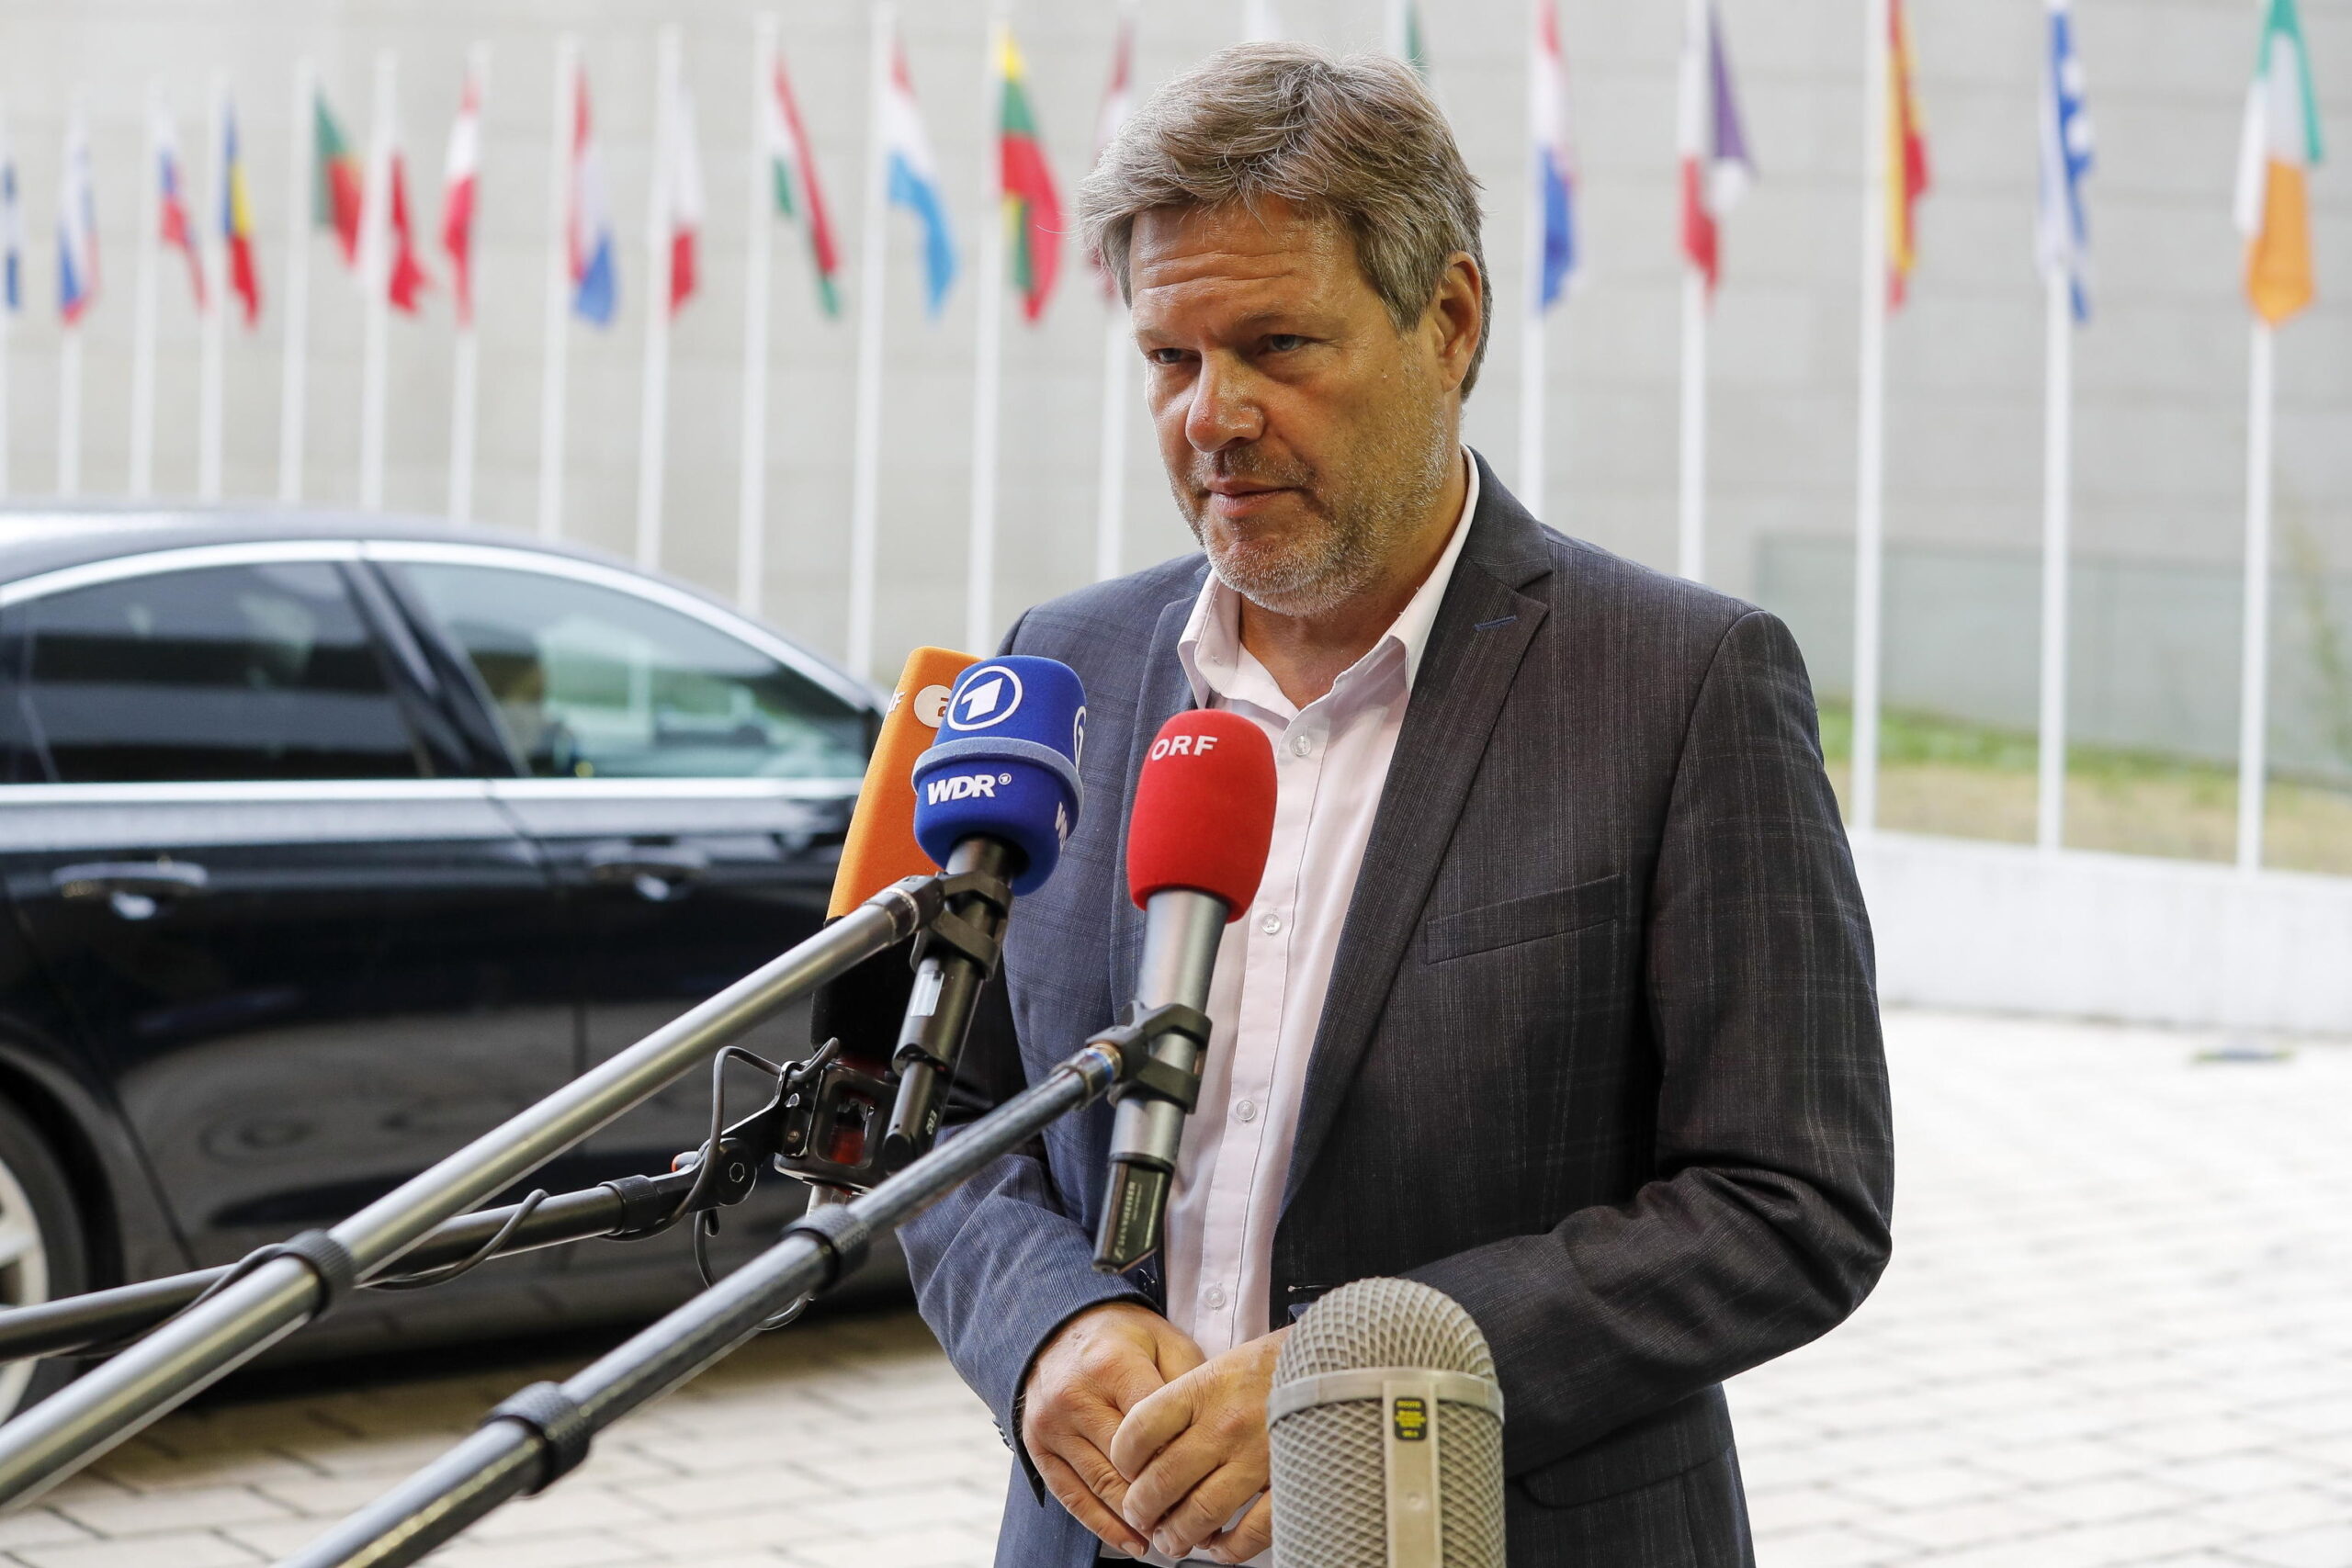 epa10036155 German Minister of Economics and Climate Protection Robert Habeck speaks to the media as he arrives for the Transport, Telecommunications and Energy Council in Luxembourg, 27 June 2022. Energy ministers are meeting to discuss the energy situation in the EU and to exchange views on proposals to reduce methane emissions and energy performance of buildings, among other topics. Ministers will adopt regulations aimed at filling EU's gas storage reserves before the winter.  EPA/JULIEN WARNAND